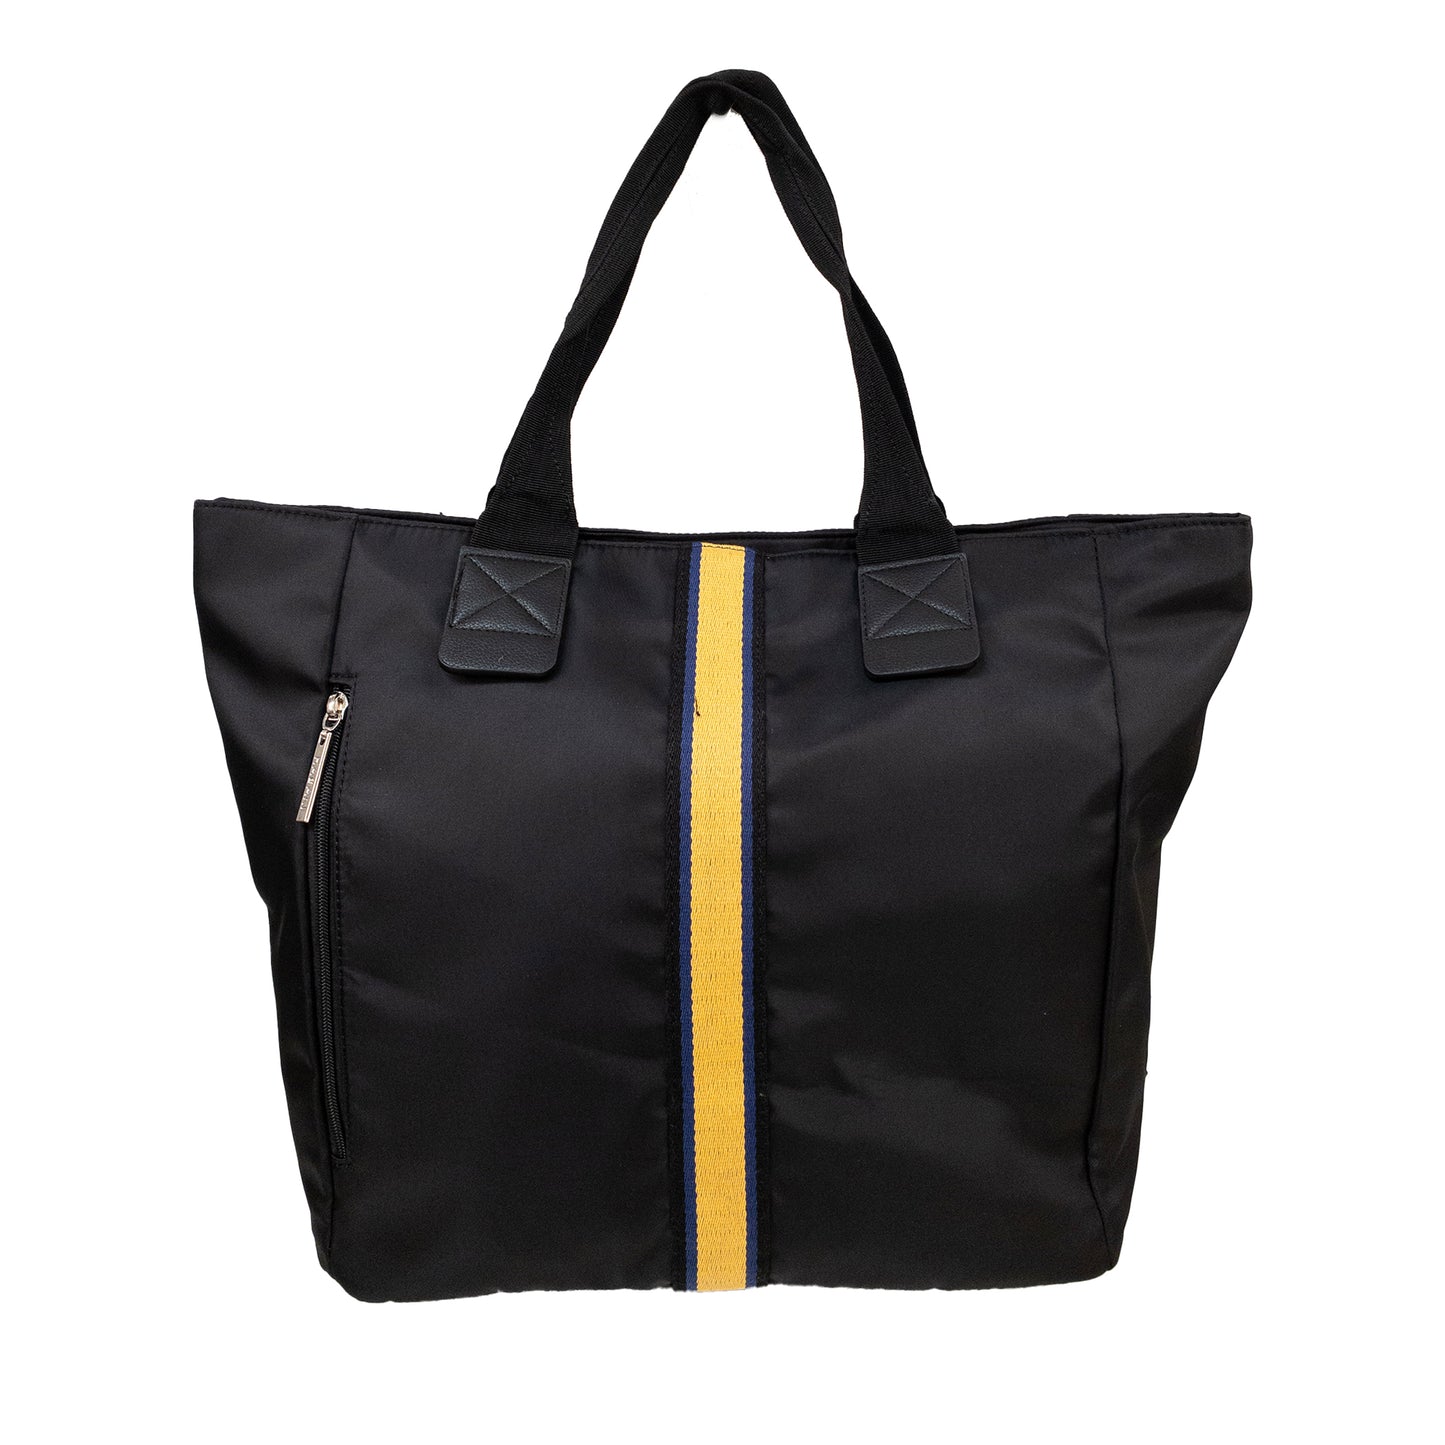 Uptown Tote